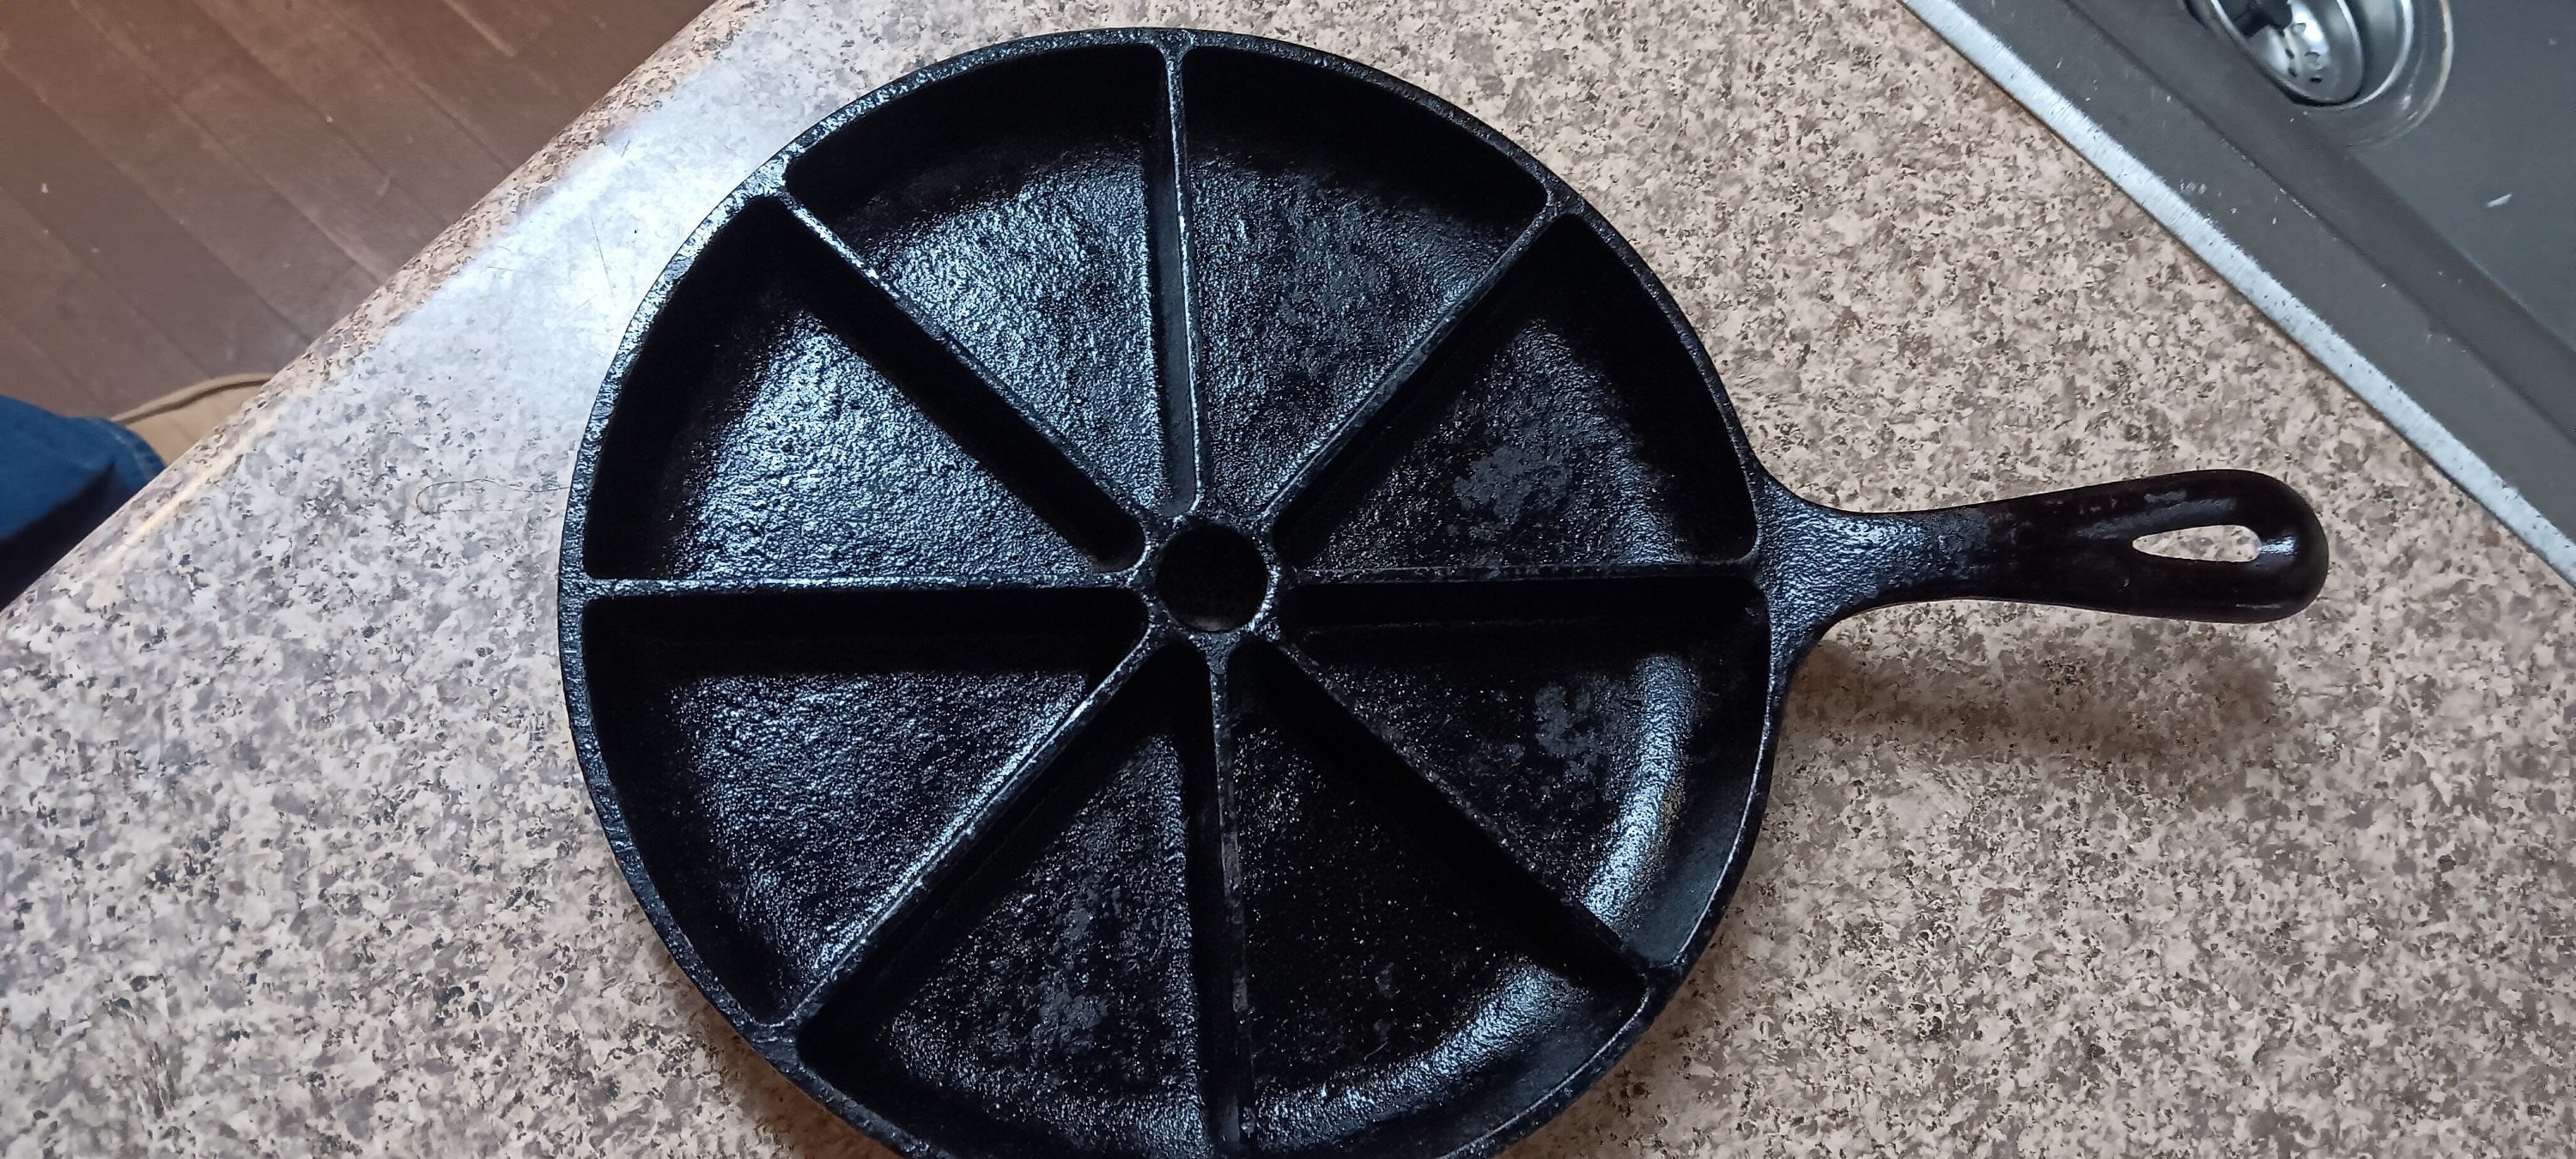 I finally found a 15 inch vintage skillet at Goodwill. Unmarked